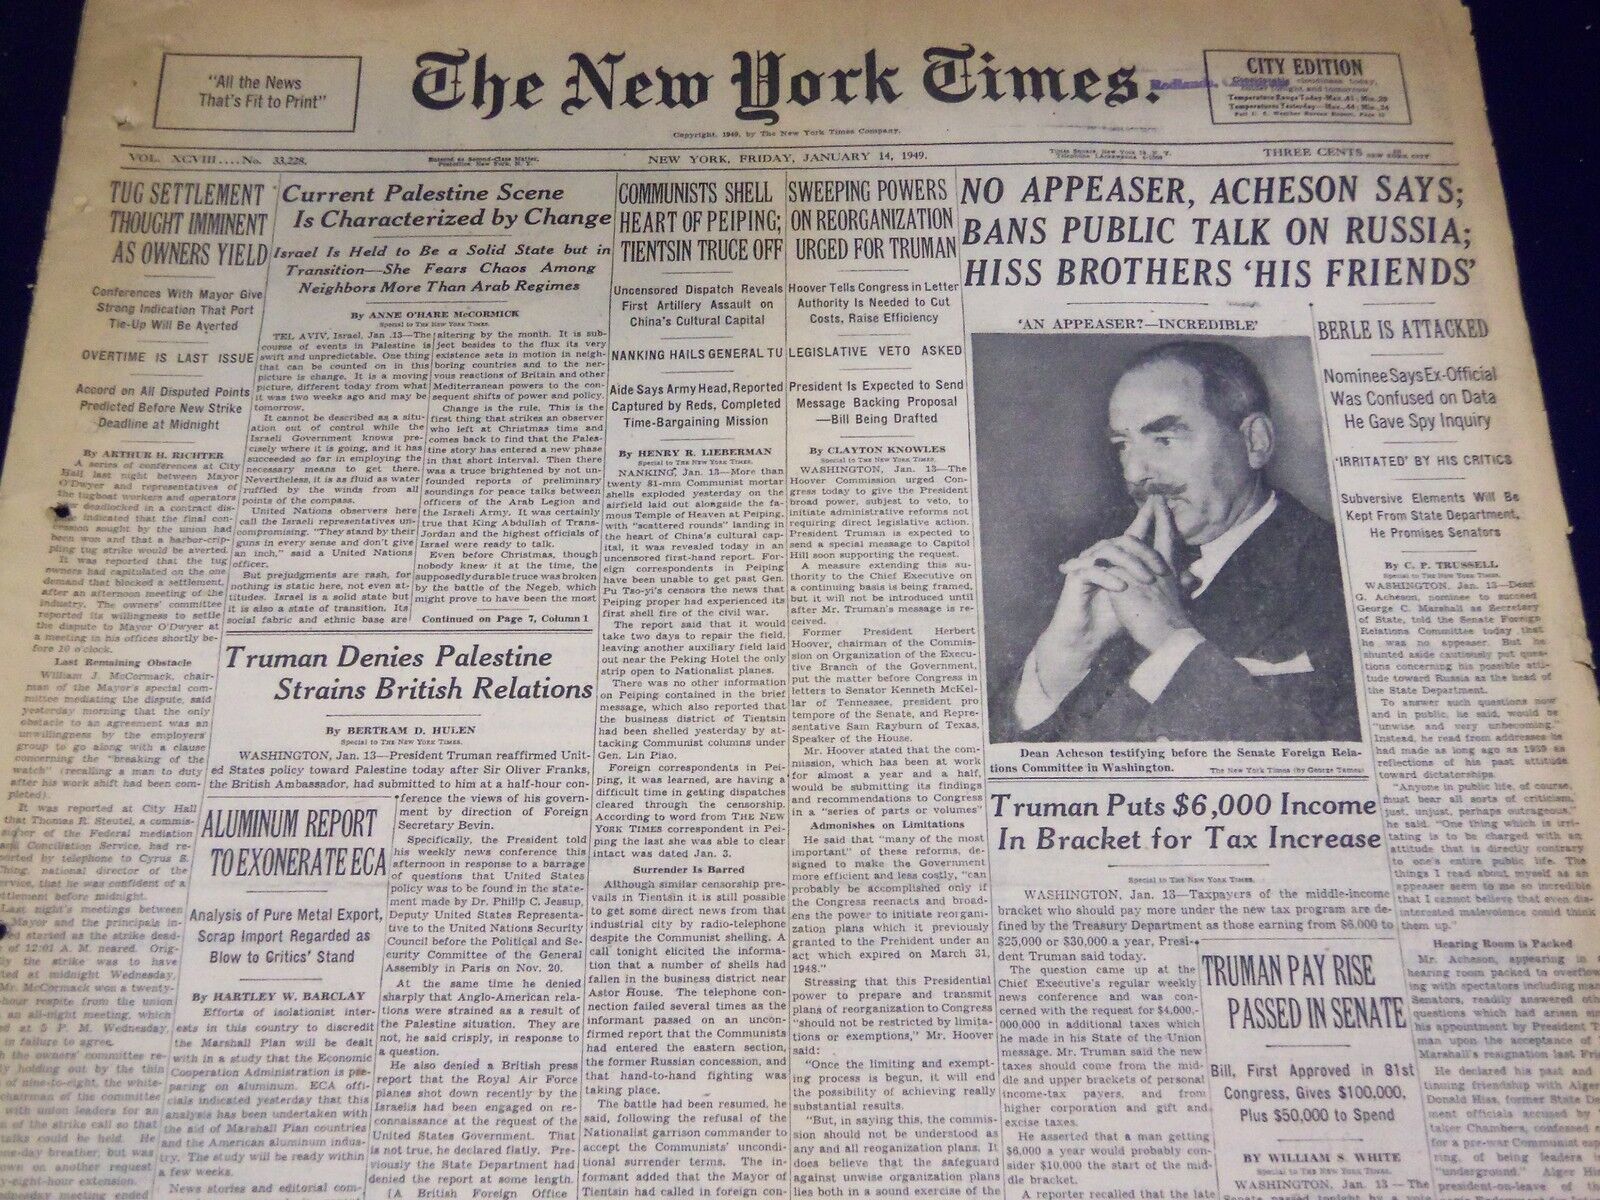 1949 JANUARY 14 NEW YORK TIMES - NO APPEASER, ACHESON SAYS - NT 3215